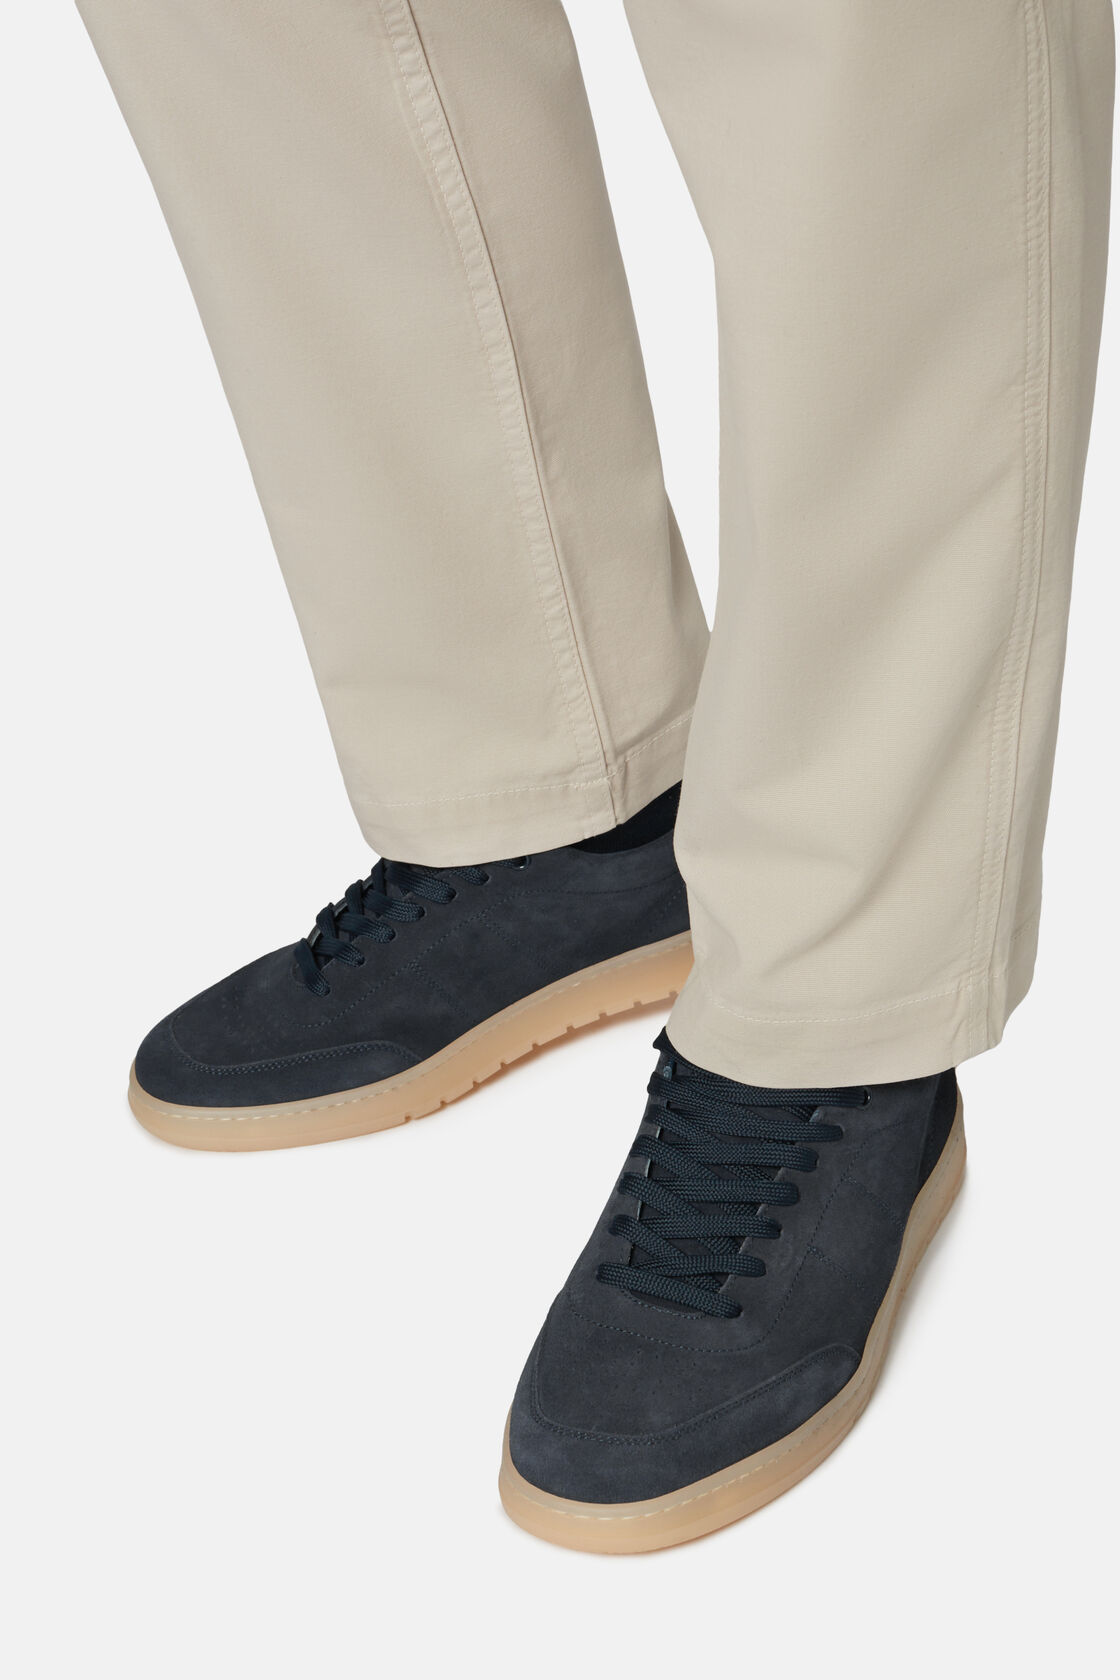 Navy Blue Suede Trainers, Navy blue, hi-res